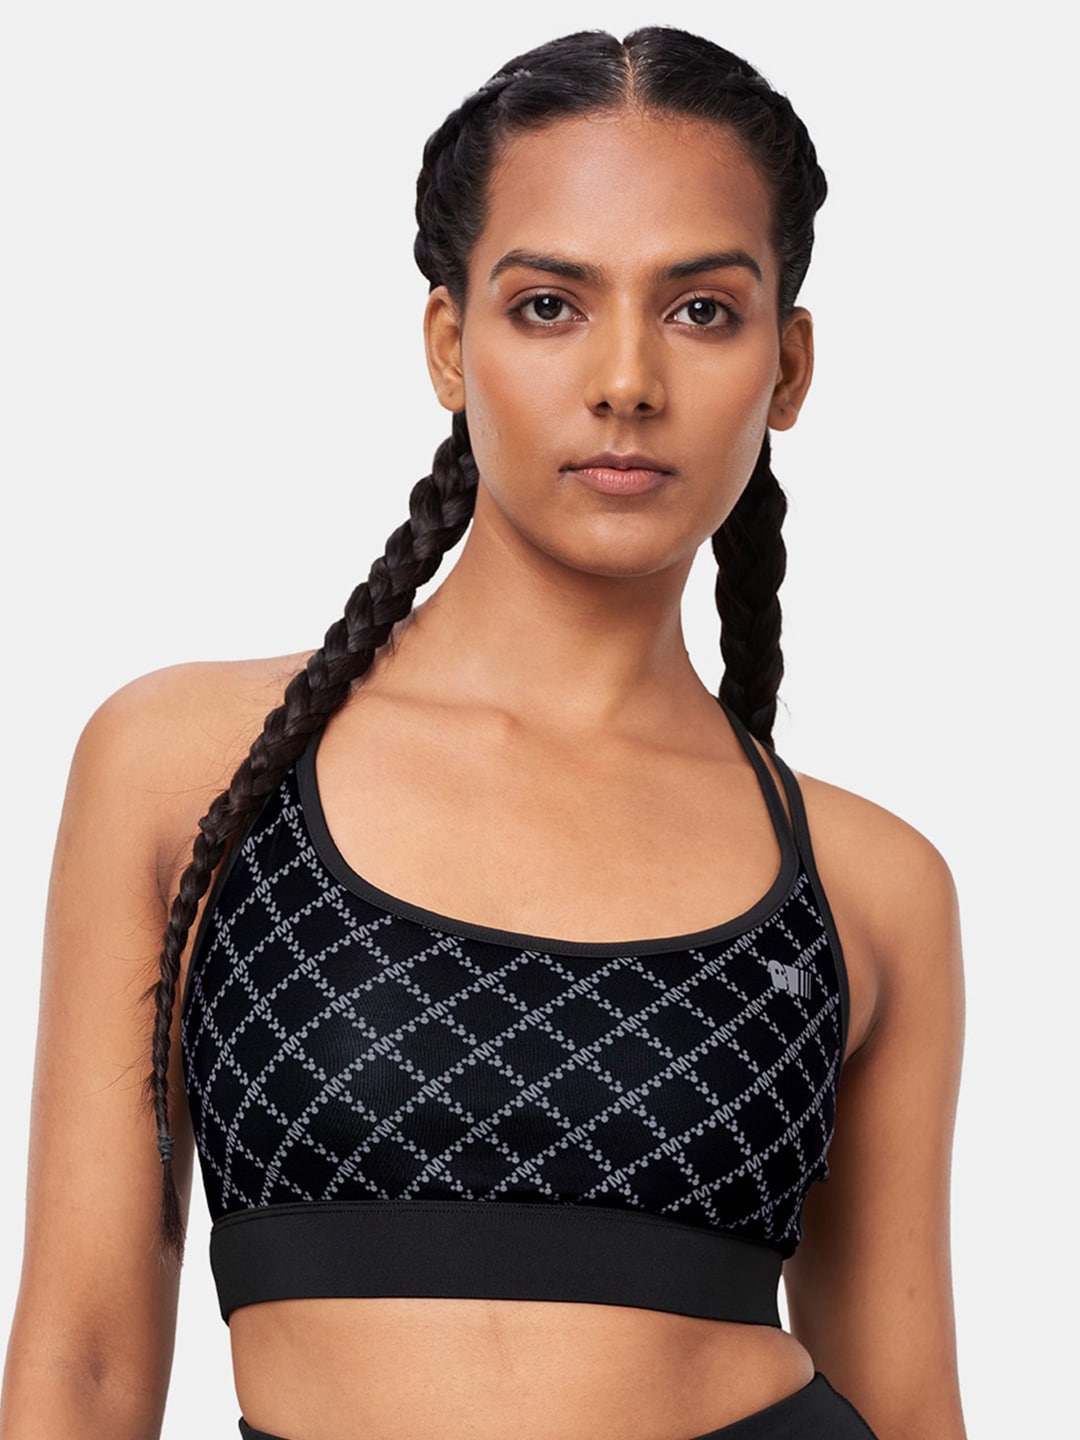 The Souled Store Black Graphic Bra Underwired Price in India